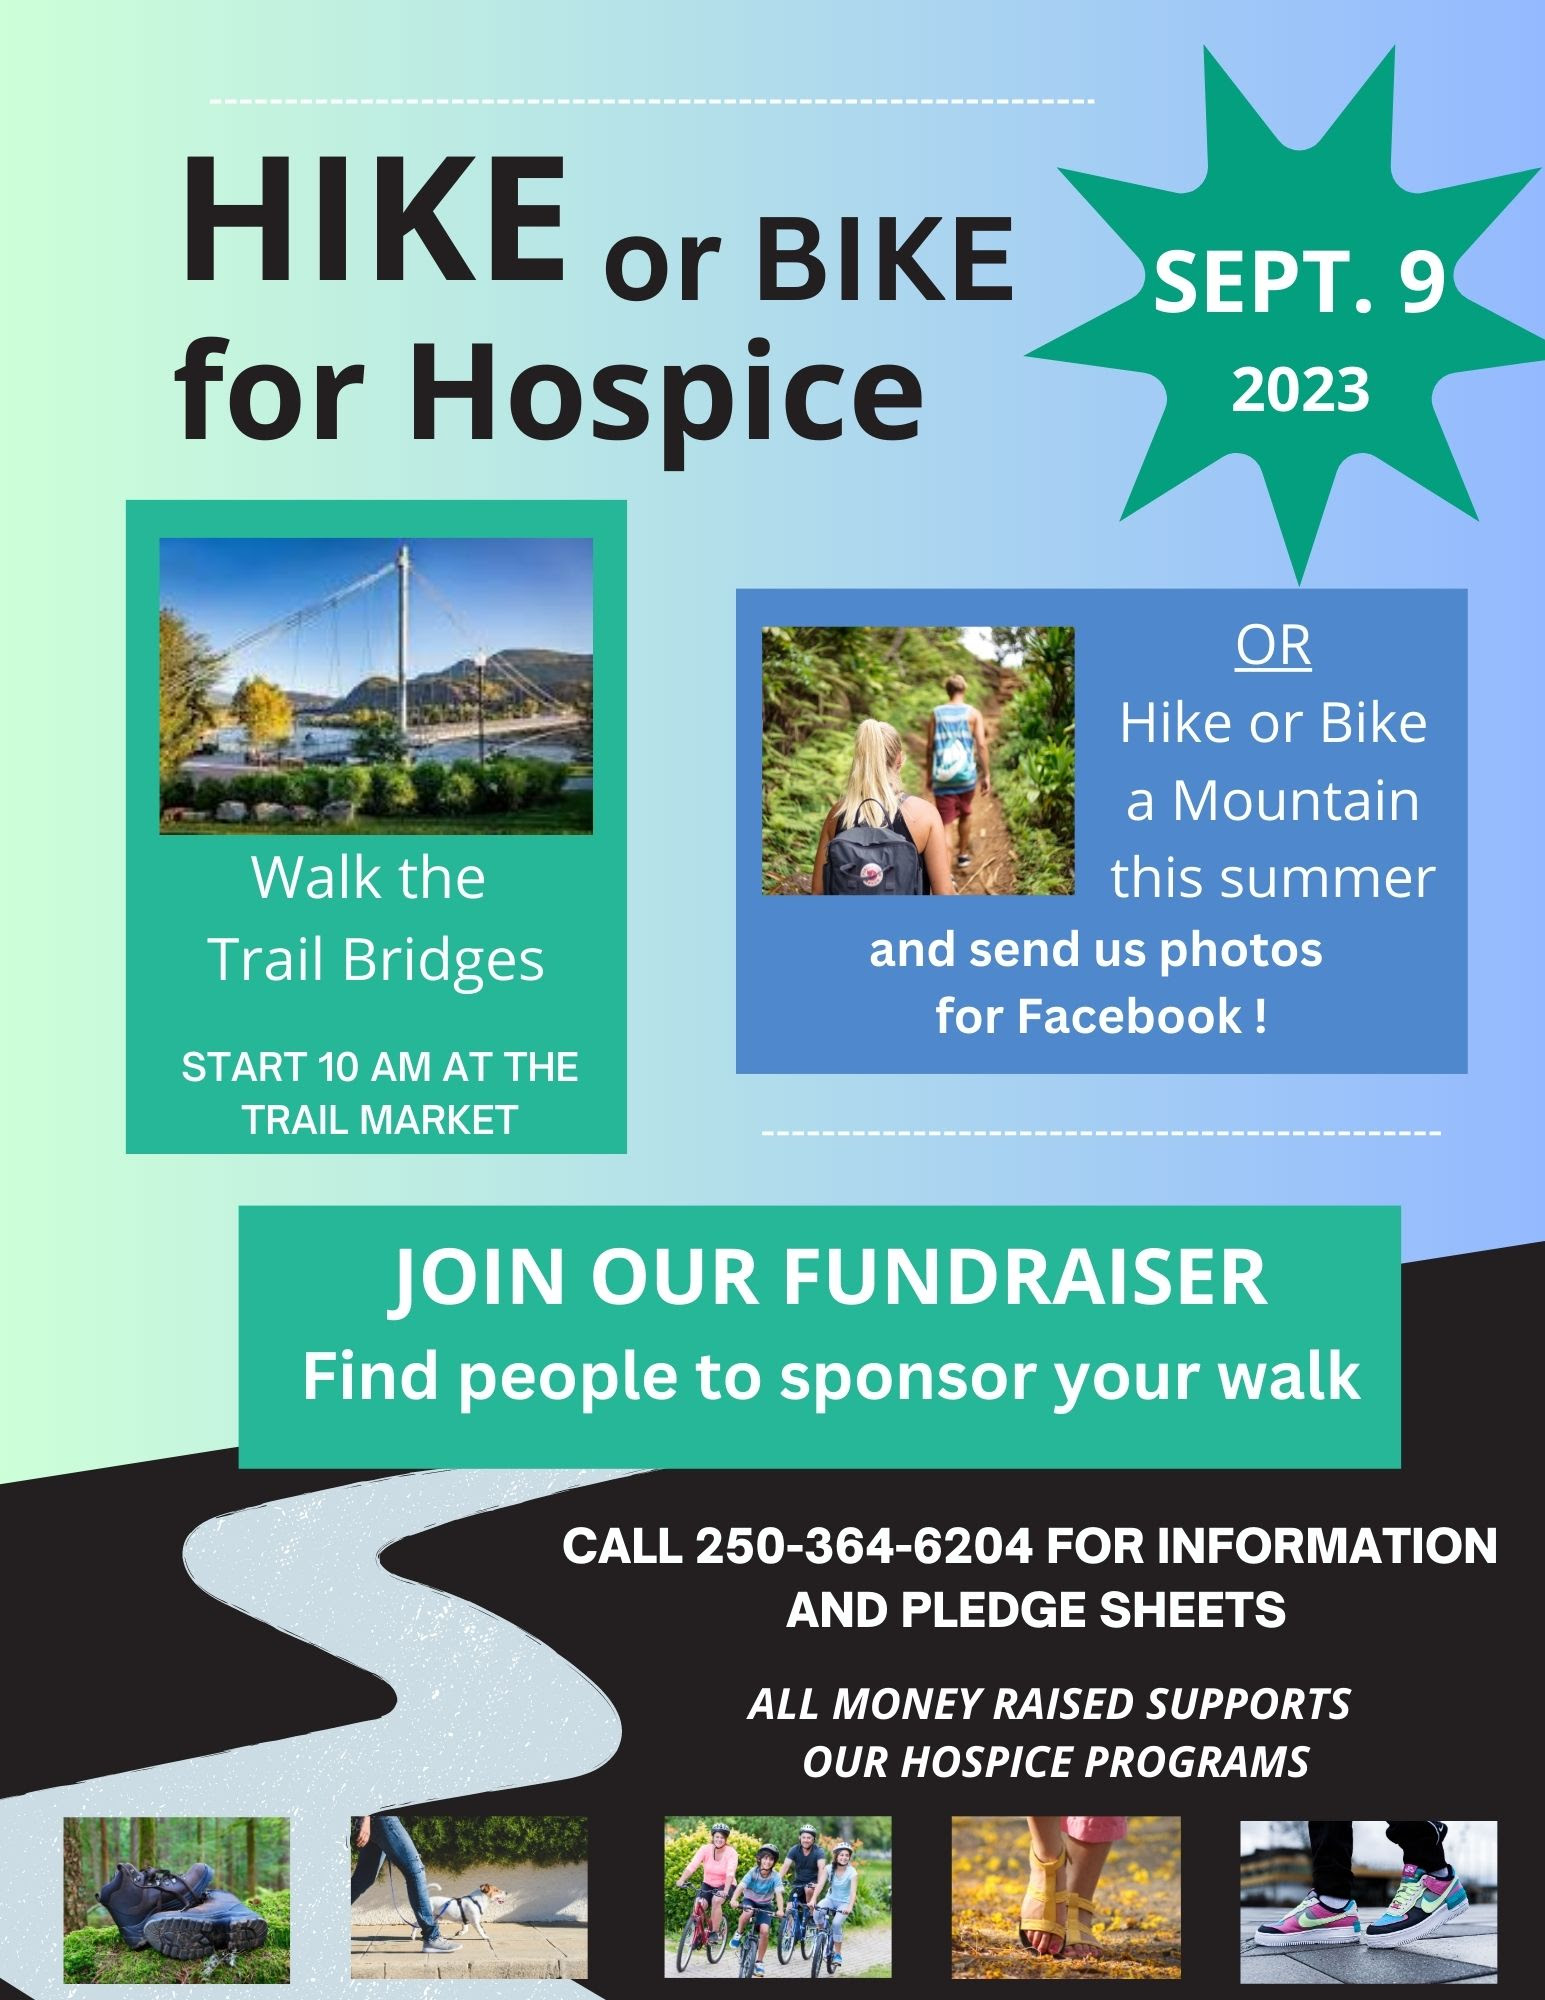 Join us on our First Annual Hike or Bike for Hospice!